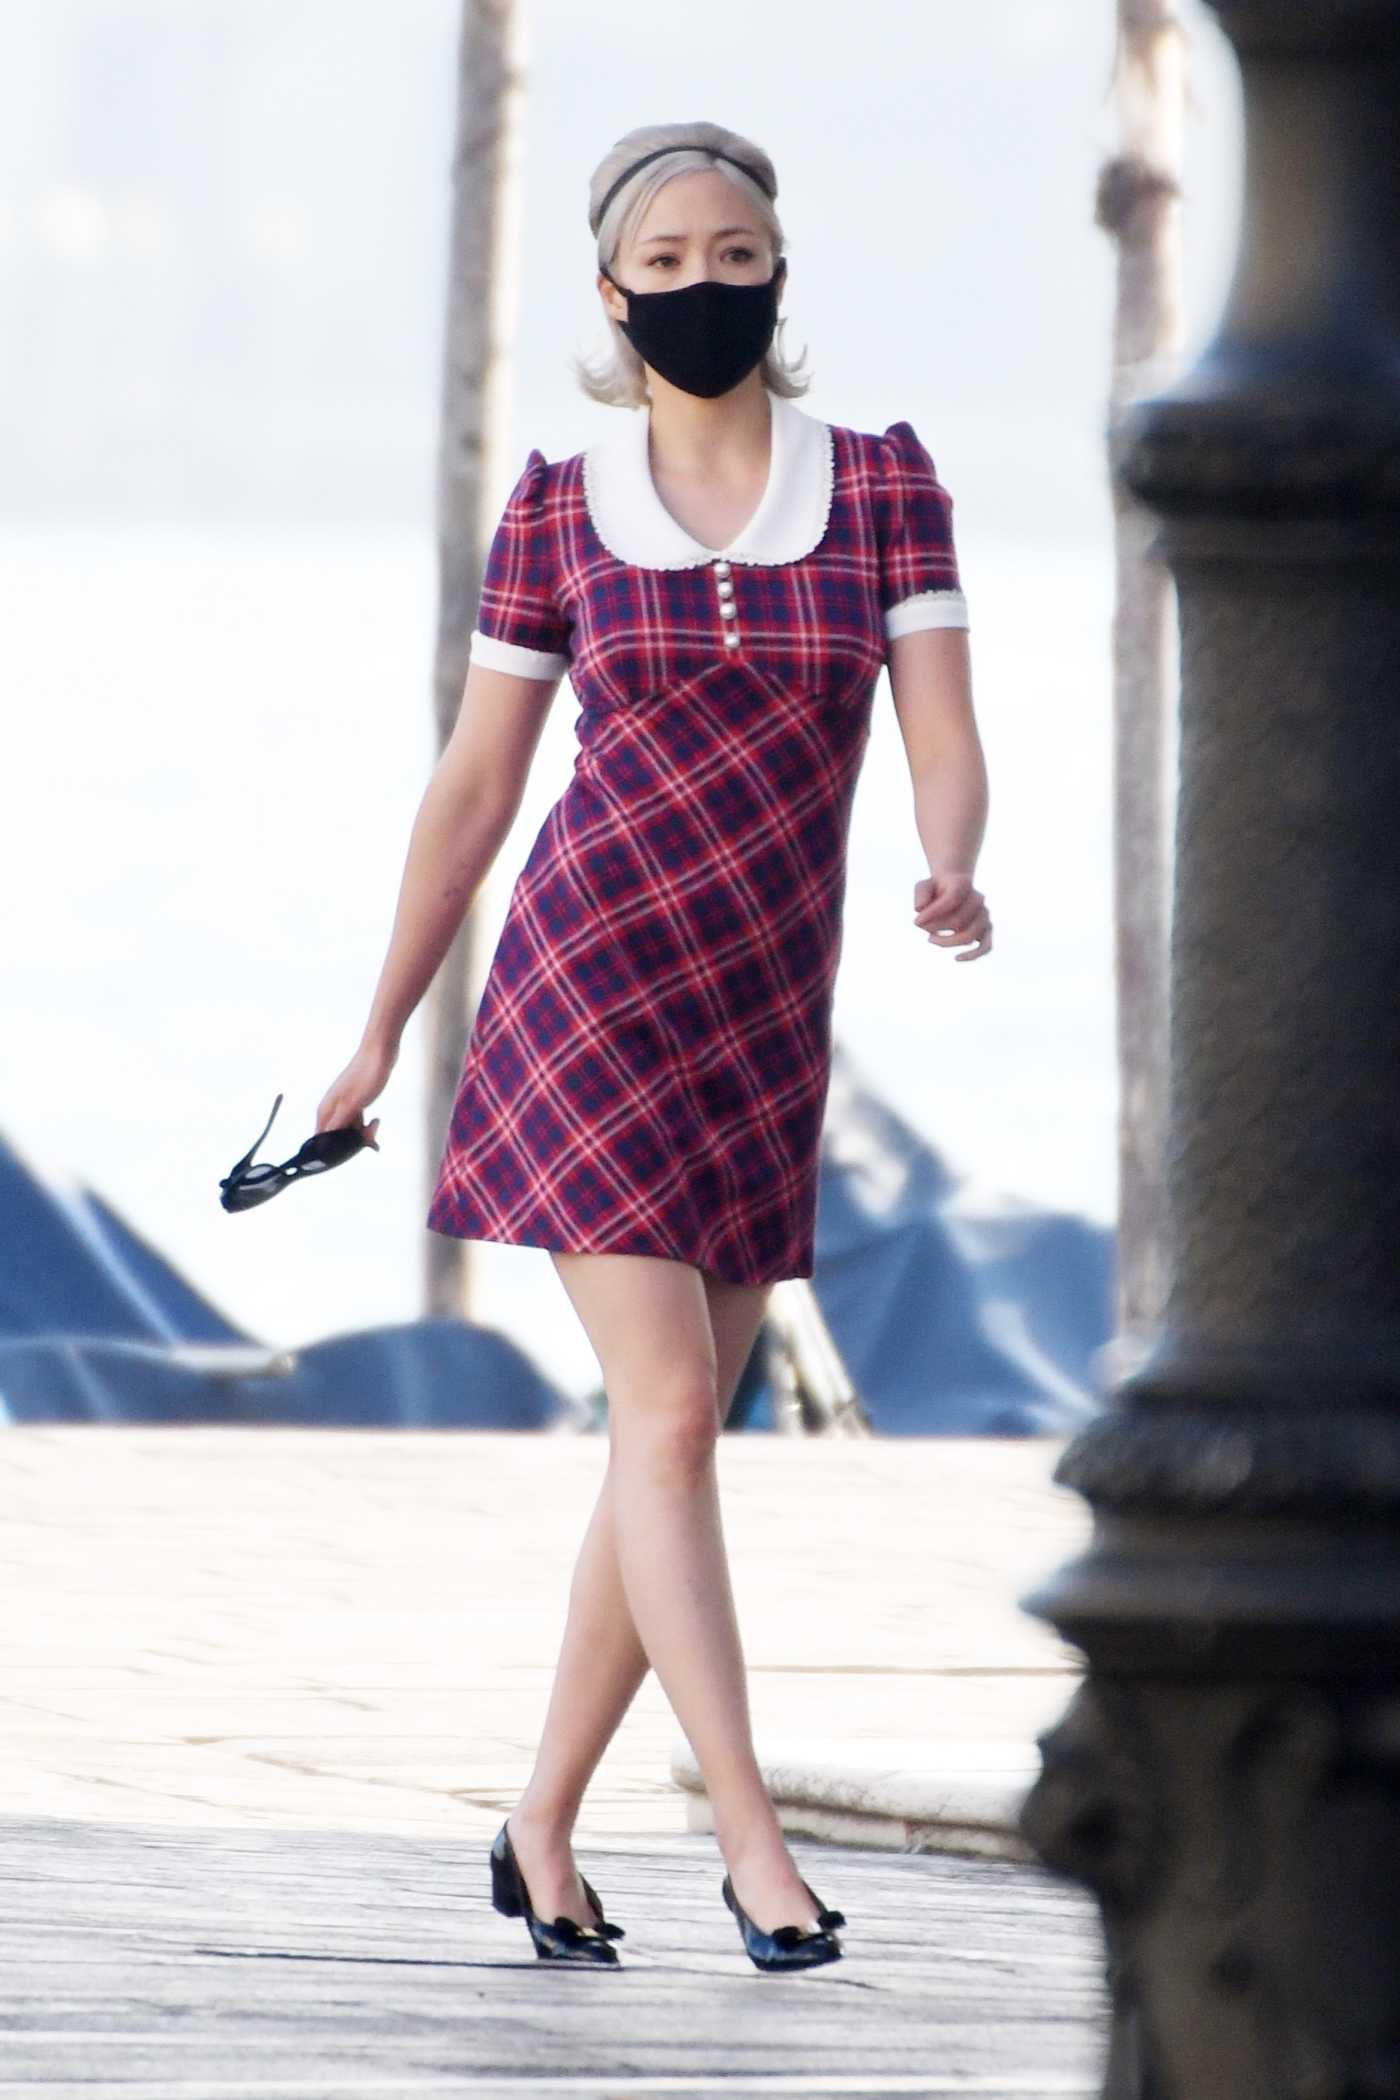 Pom Klementieff in a Plaid Mini Dress Has Fun in the Squares of Venice 11/09/2020